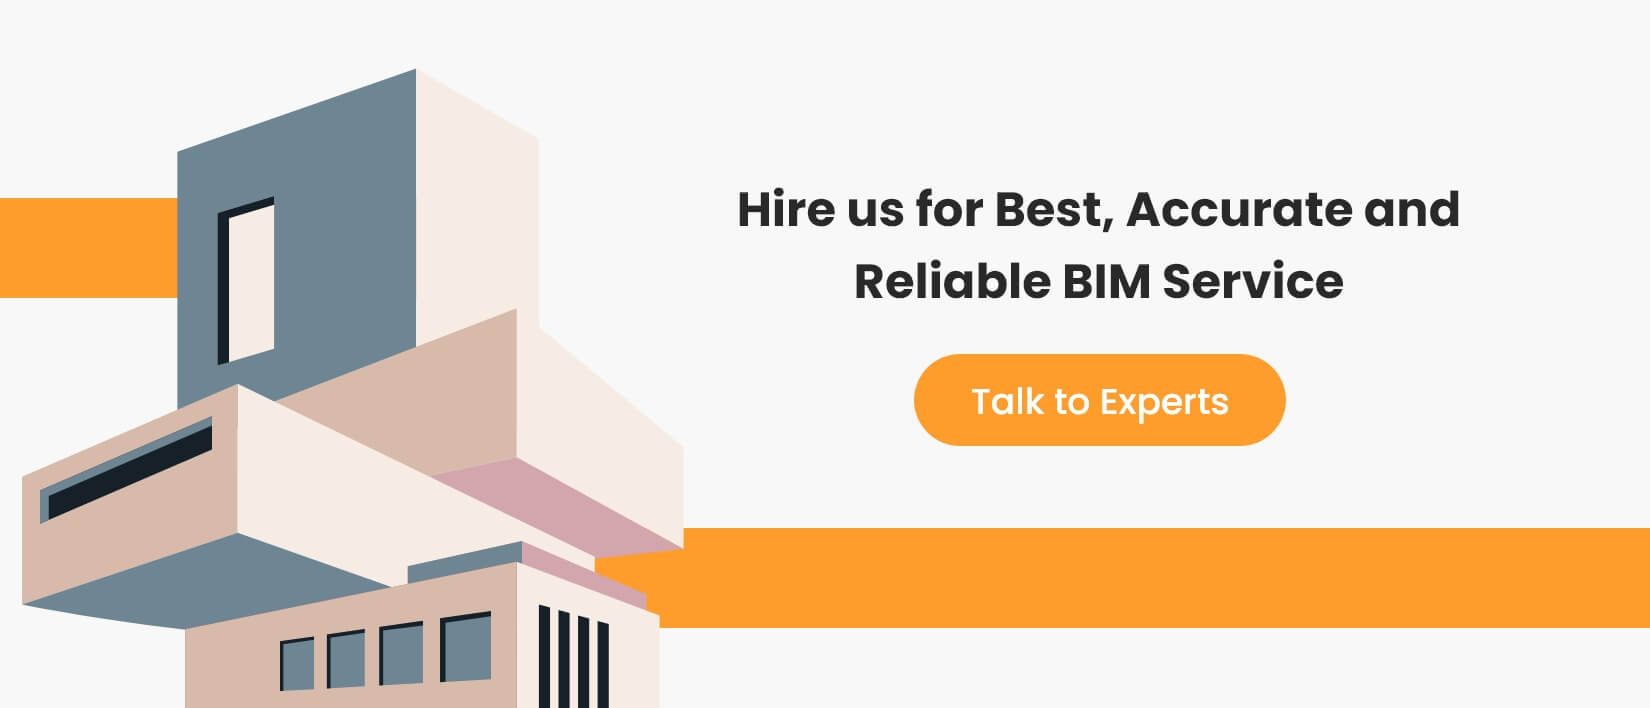 Hire us for Best, Accurate and Reliable BIM Service